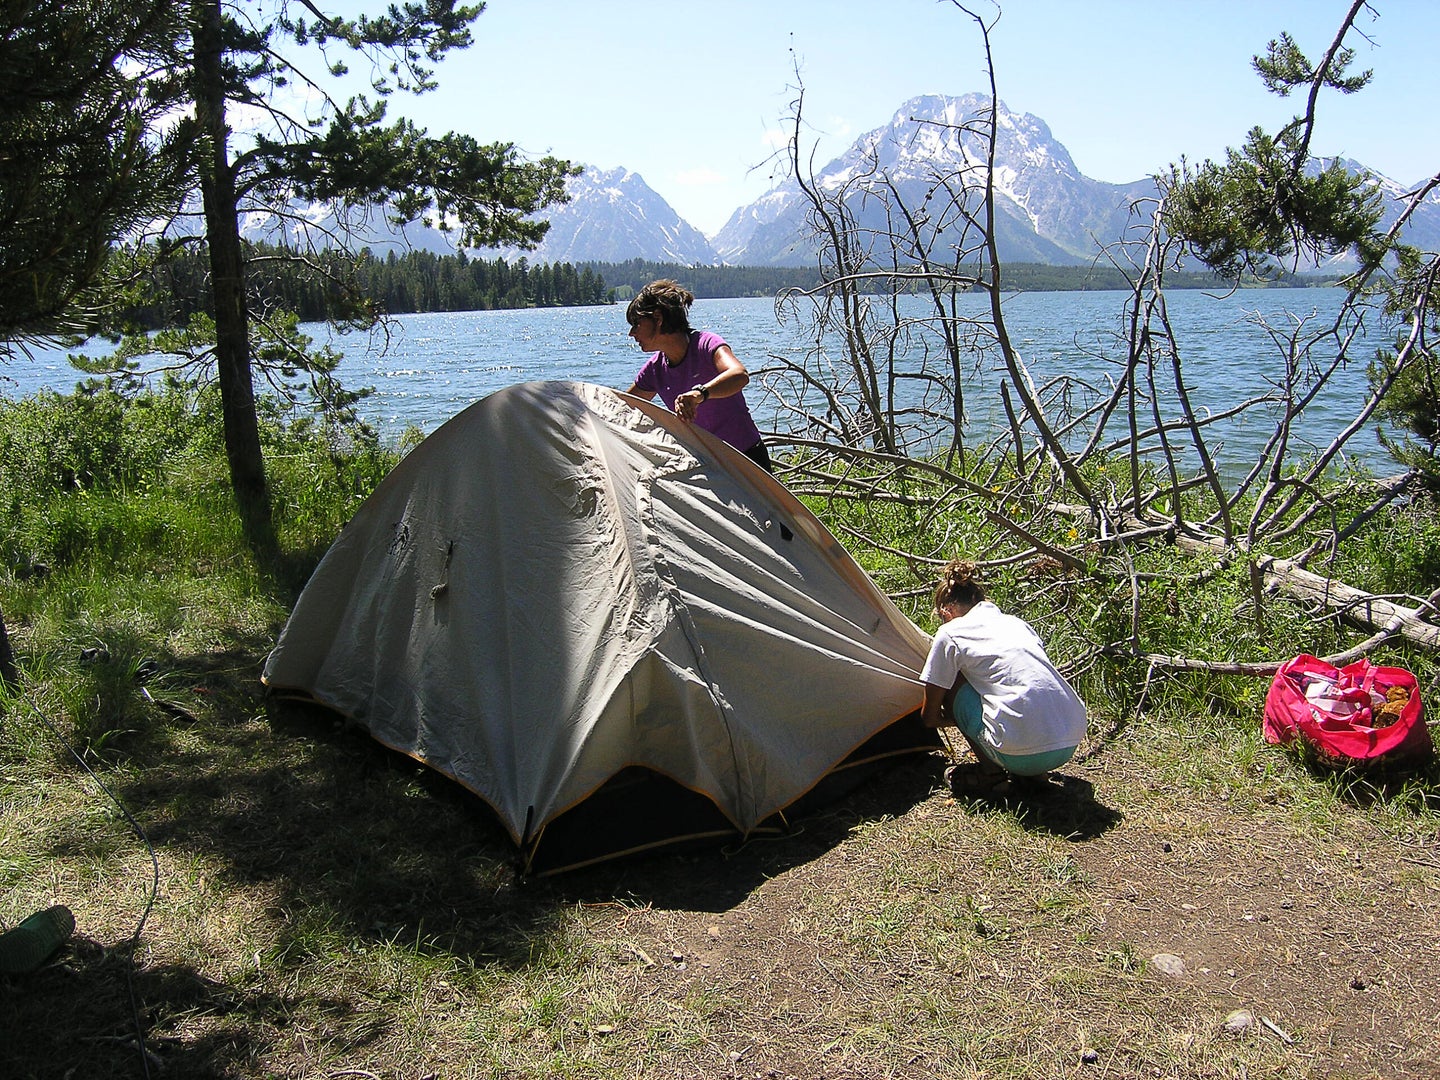 Camping in the Grand Tetons